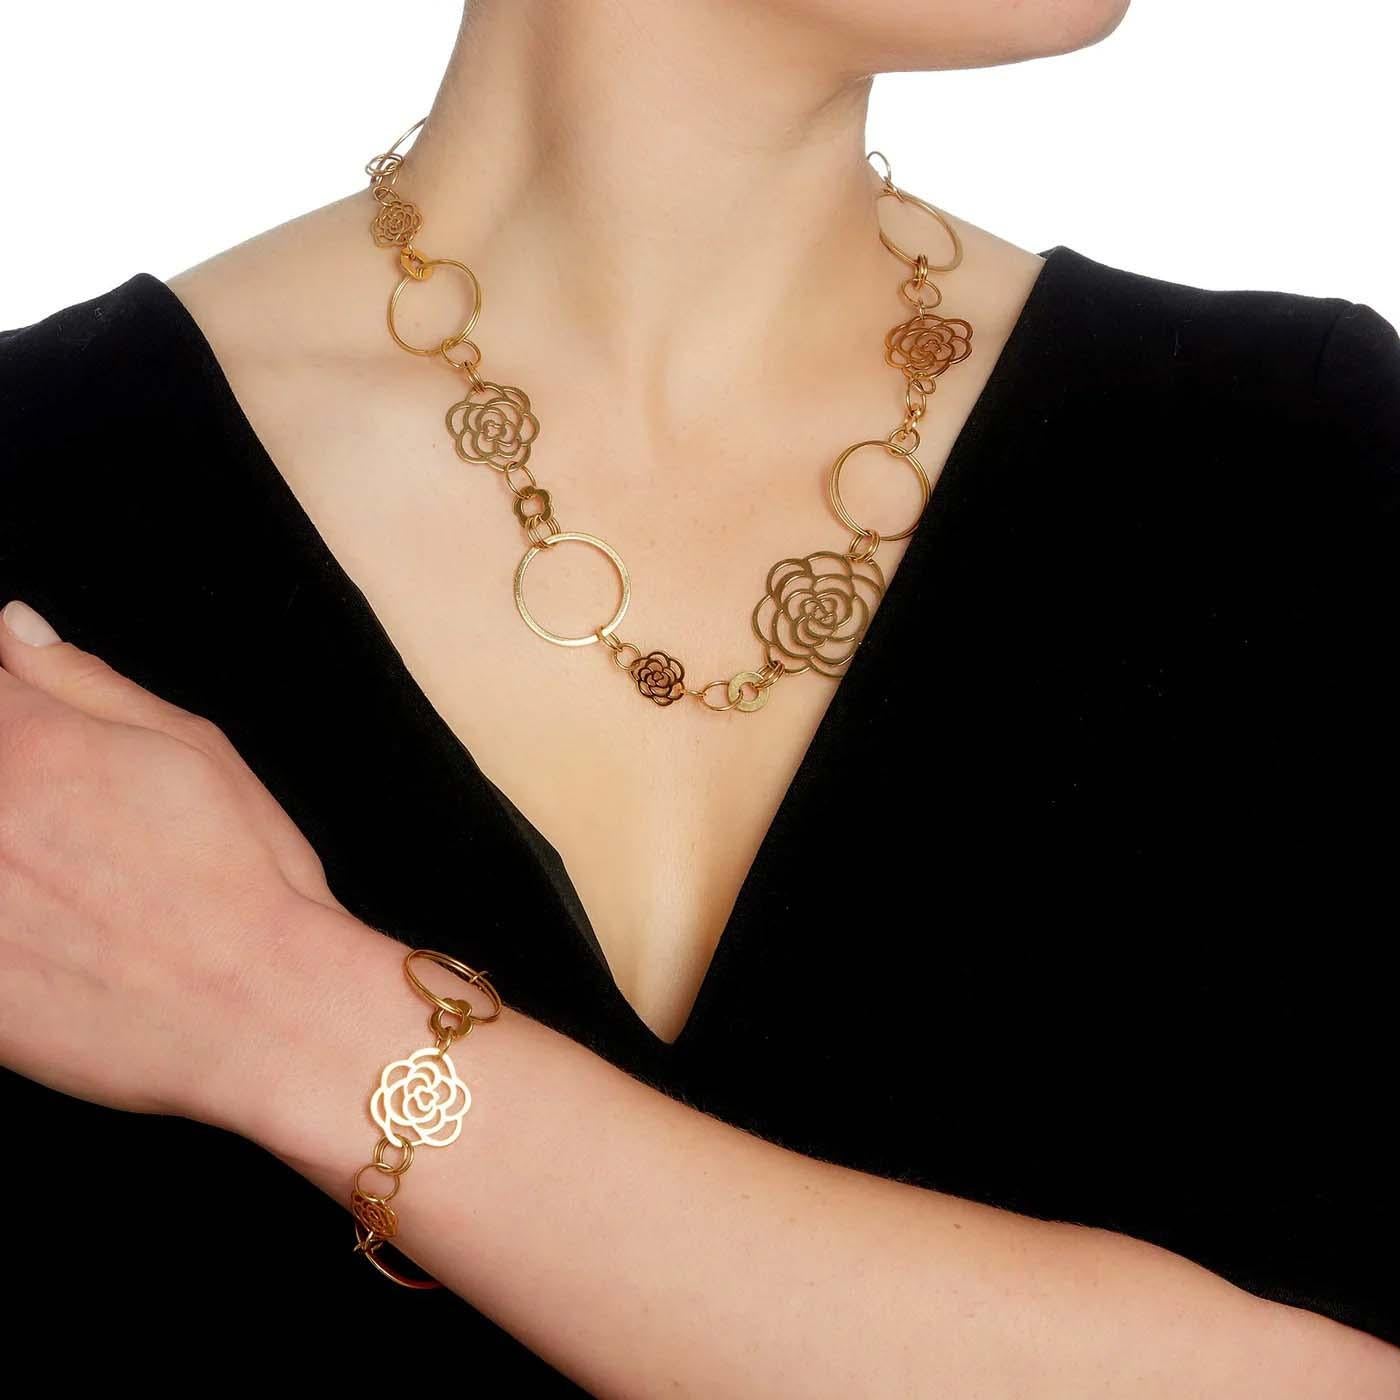 This chic authentic necklace and bracelet are by Chanel from the Camellia Collection. Crafted from 18k yellow gold with a polished finish. The necklace has small to large 7 camellia flower motifs with small to large circles and double ring motifs.